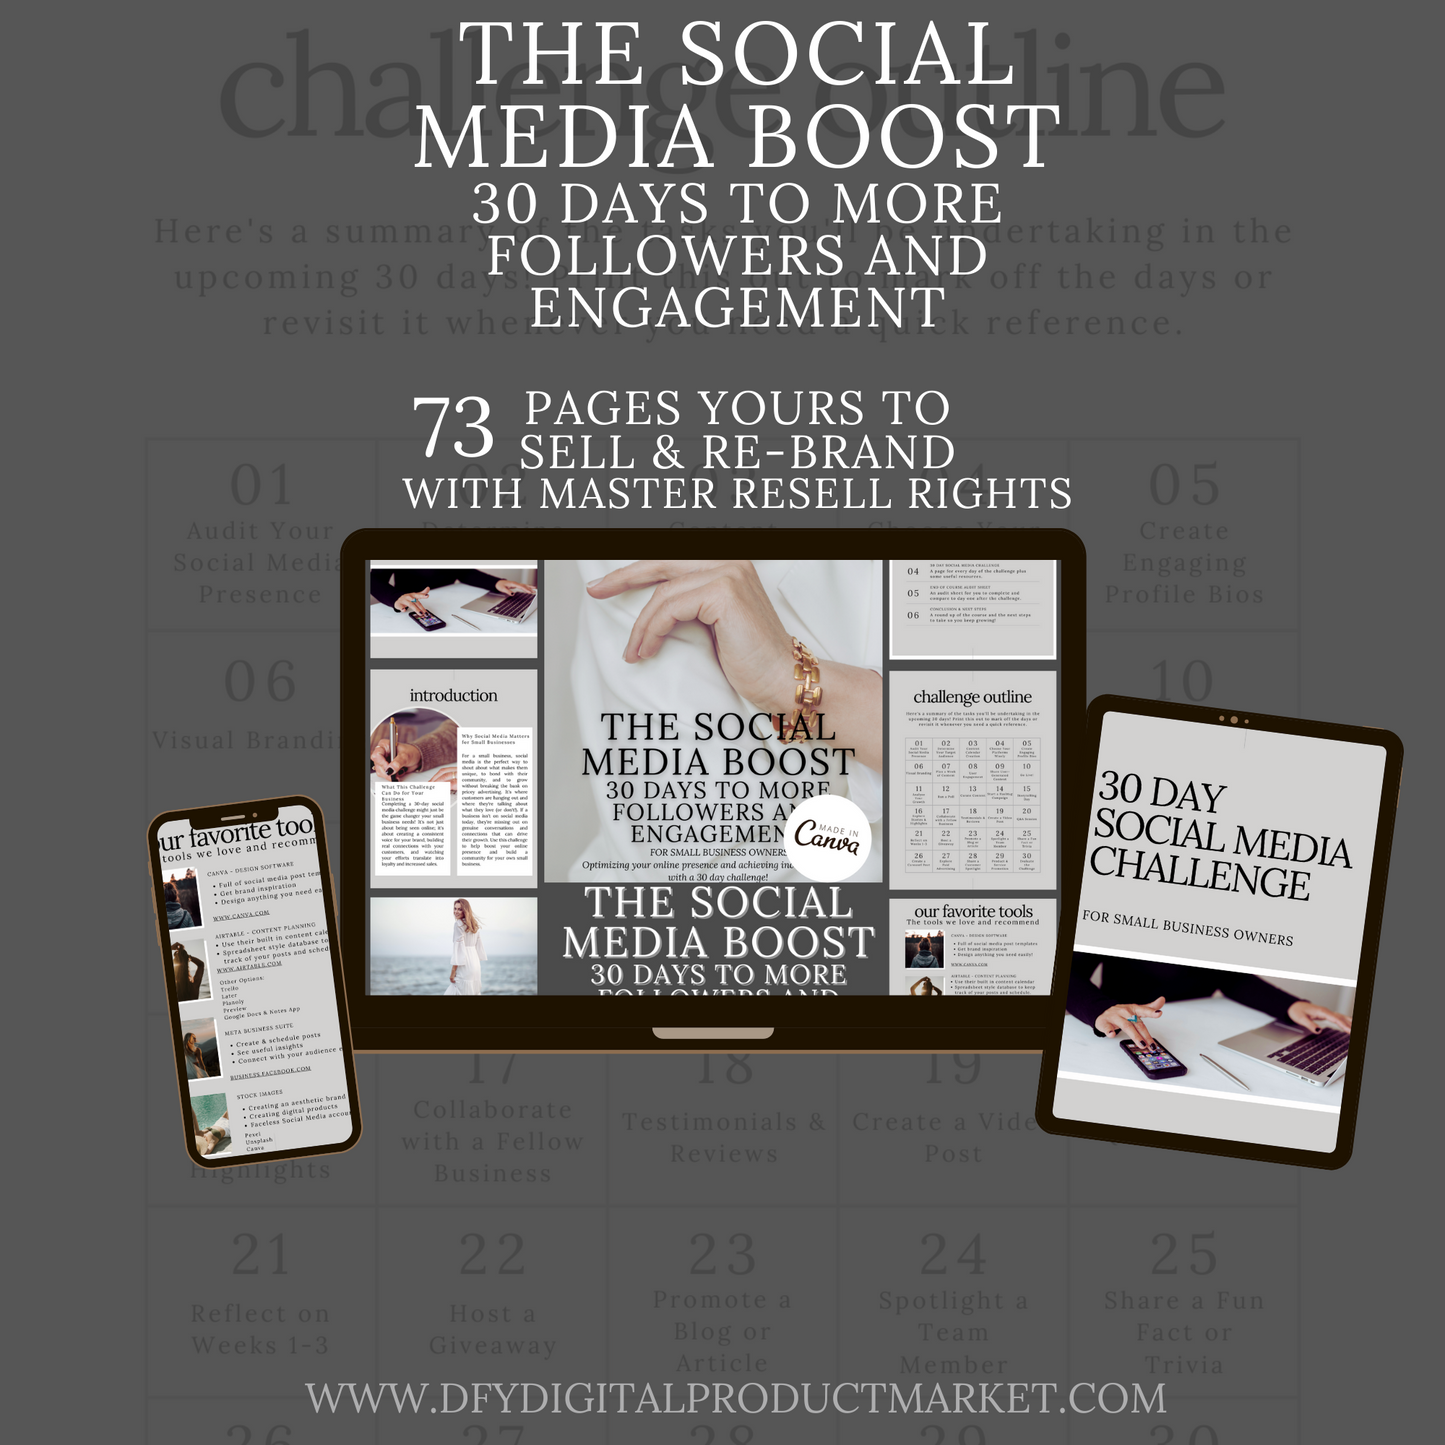 The Social Media Boost 30 Day Challenge EBOOK Guide and Workbook